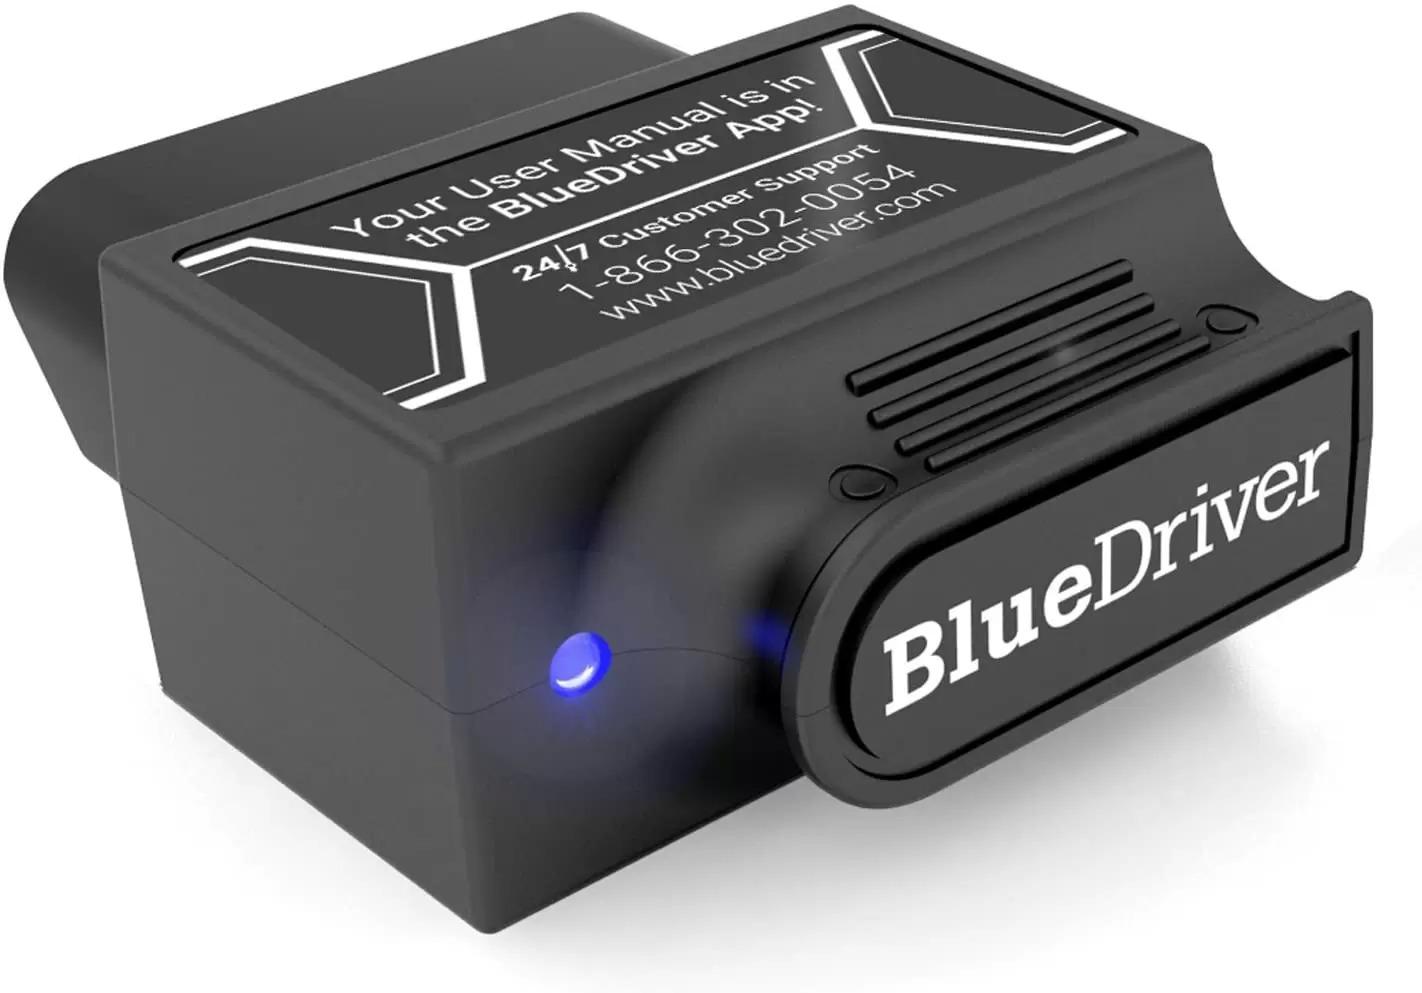 BlueDriver Bluetooth Pro OBDII Scan Tool for iPhone and Android for $69.95 Shipped